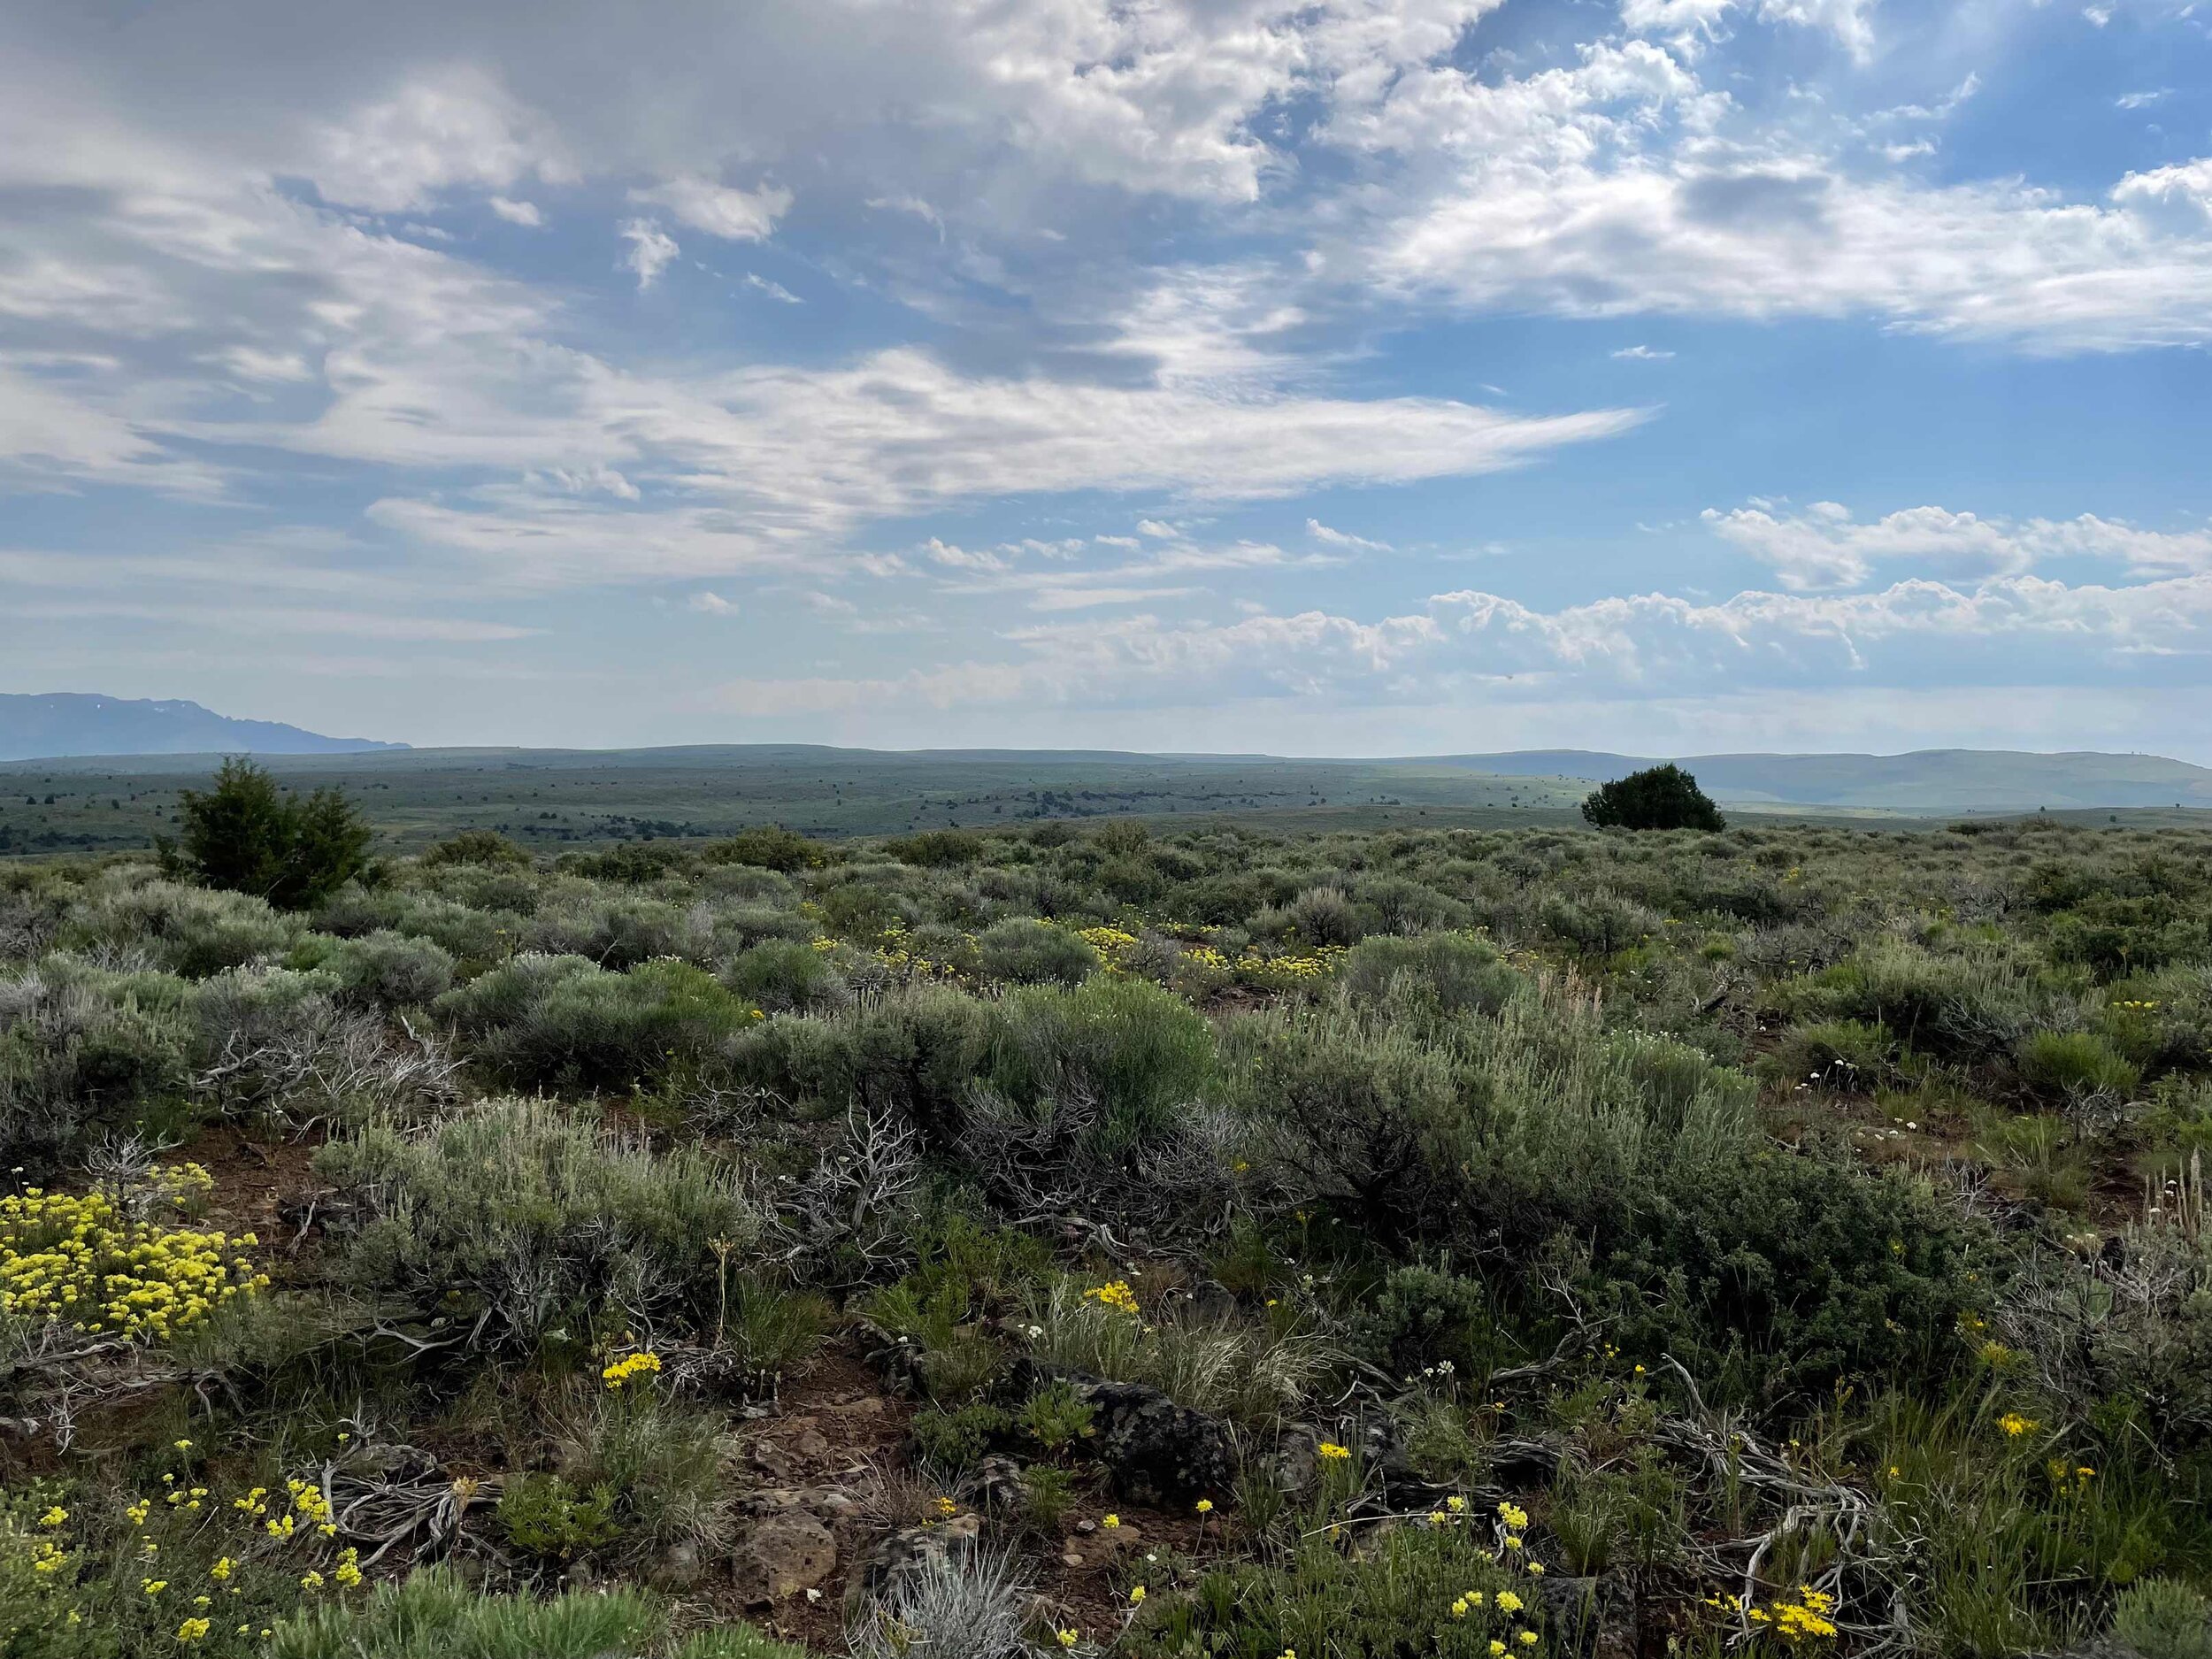  Rolling hills of sagebrush and yellow wildflowers under a blanket of white clouds hanging in a blue sky.  